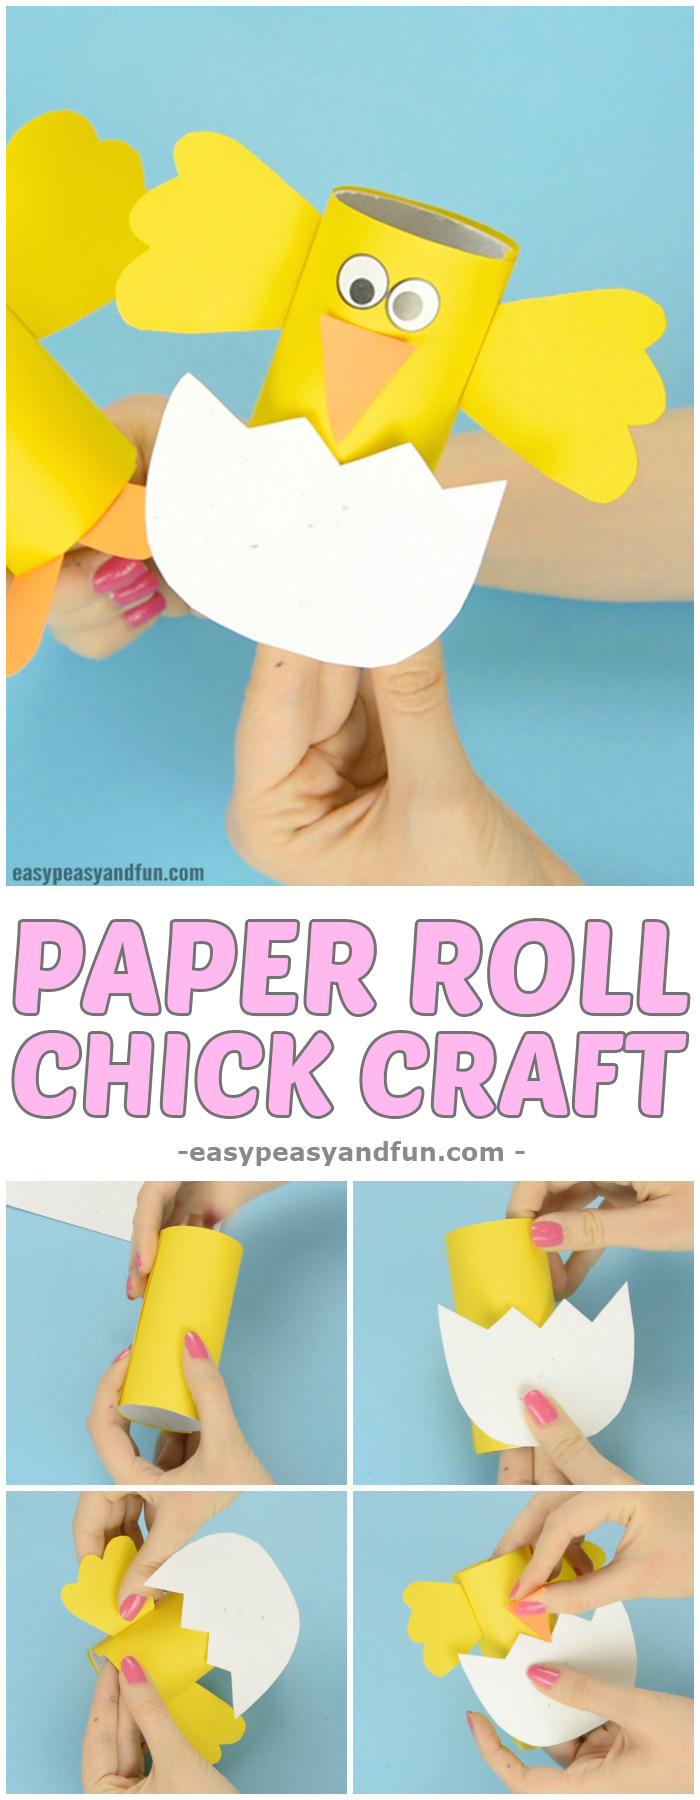 Crafts using chick paper rolls.  Fun Easter craft ideas for kids.  #Easter Crafts # Chick Crafts # Toilet Paper Roll Crafts